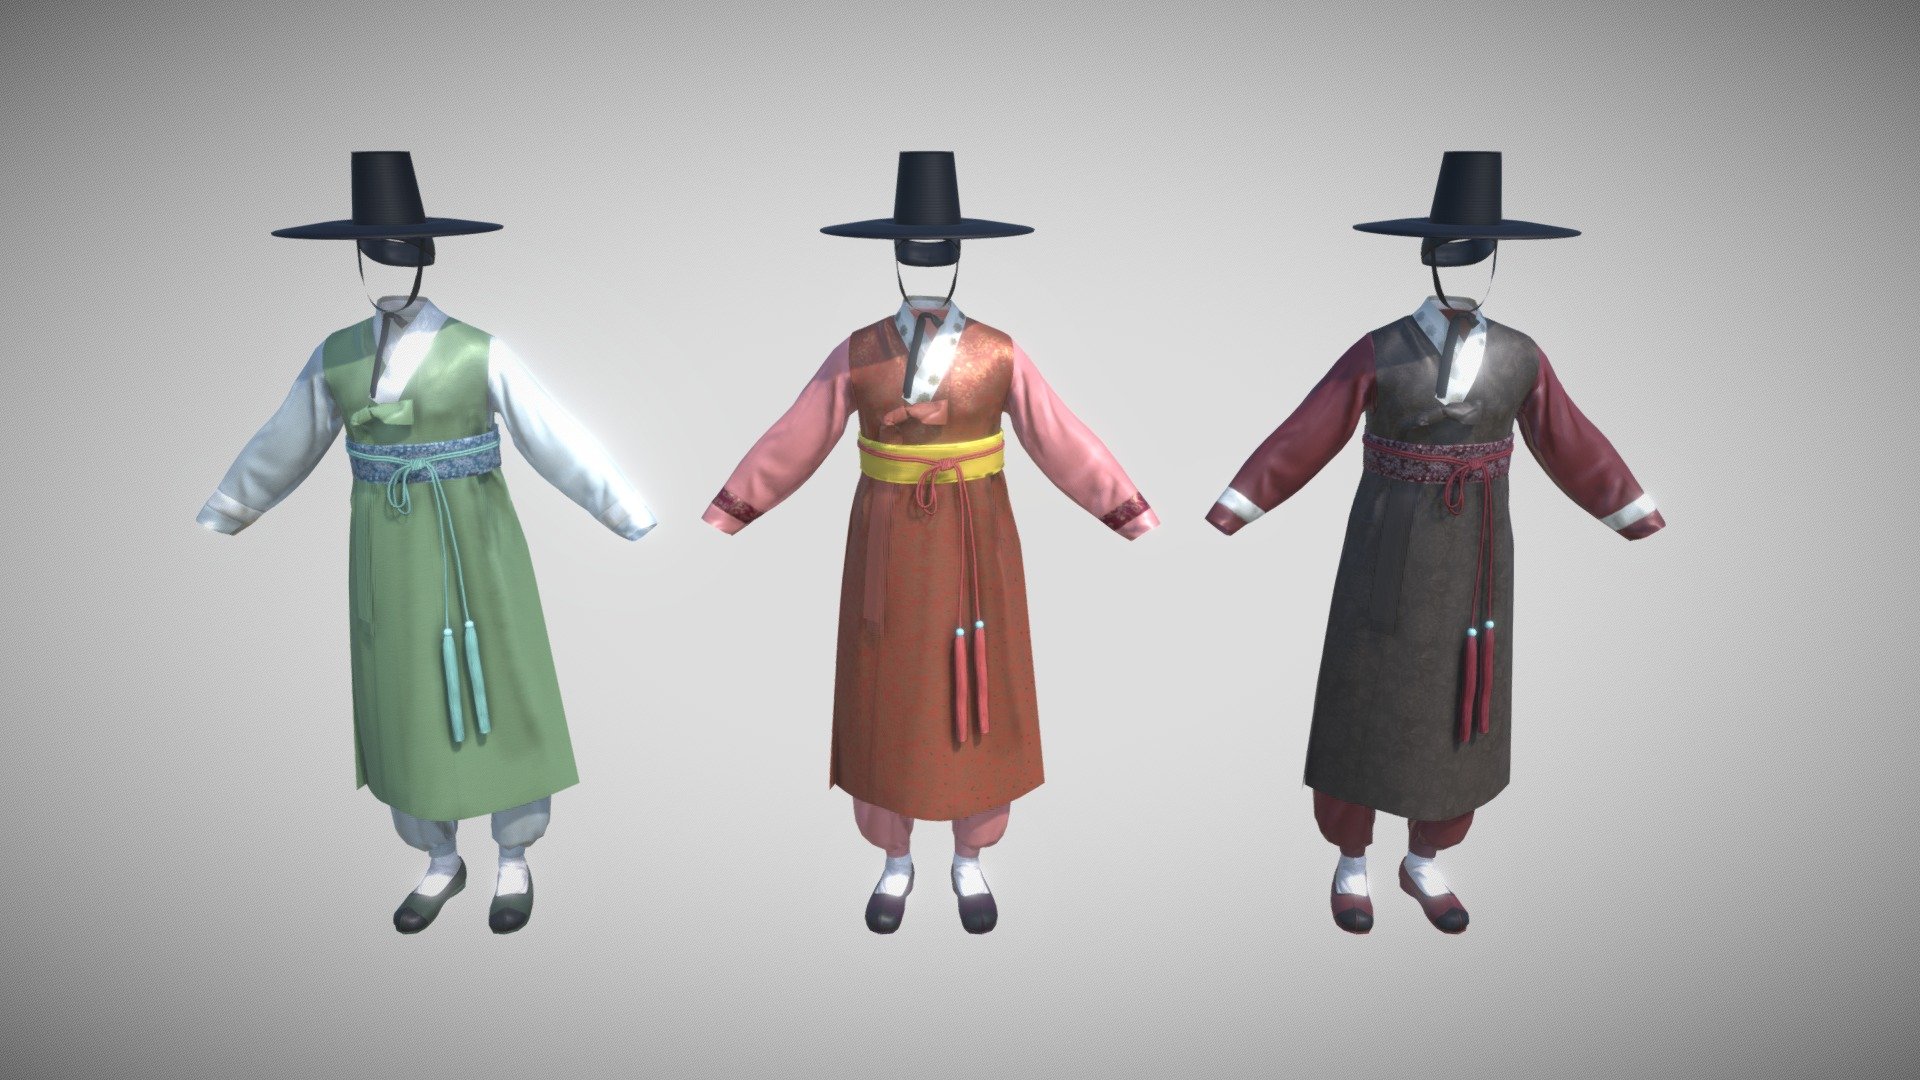 This model is GAME READY for Unity

File Formats:

3ds Max 2019 FBX (Multi Format)

Model: The Hanbok is modeled on a real scale.

Geometry count:




11,528 polys ( Clothes : 7,949  / Hat : 1,841 / Shoes : 1,738 )

22,806 tris ( Clothes : 15,729 / Hat : 3,604 / Shoes : 3,476 )

11,917 verts ( Clothes : 8,112 / Hat : 1,991 / Shoes : 1,814 )
Textures: 2048x2048 Albedo, Metallic, Normal Maps

Textures designed for physically based rendering (PBR) Textures in .png format

I have exported specialized texture maps for Unity 3d model